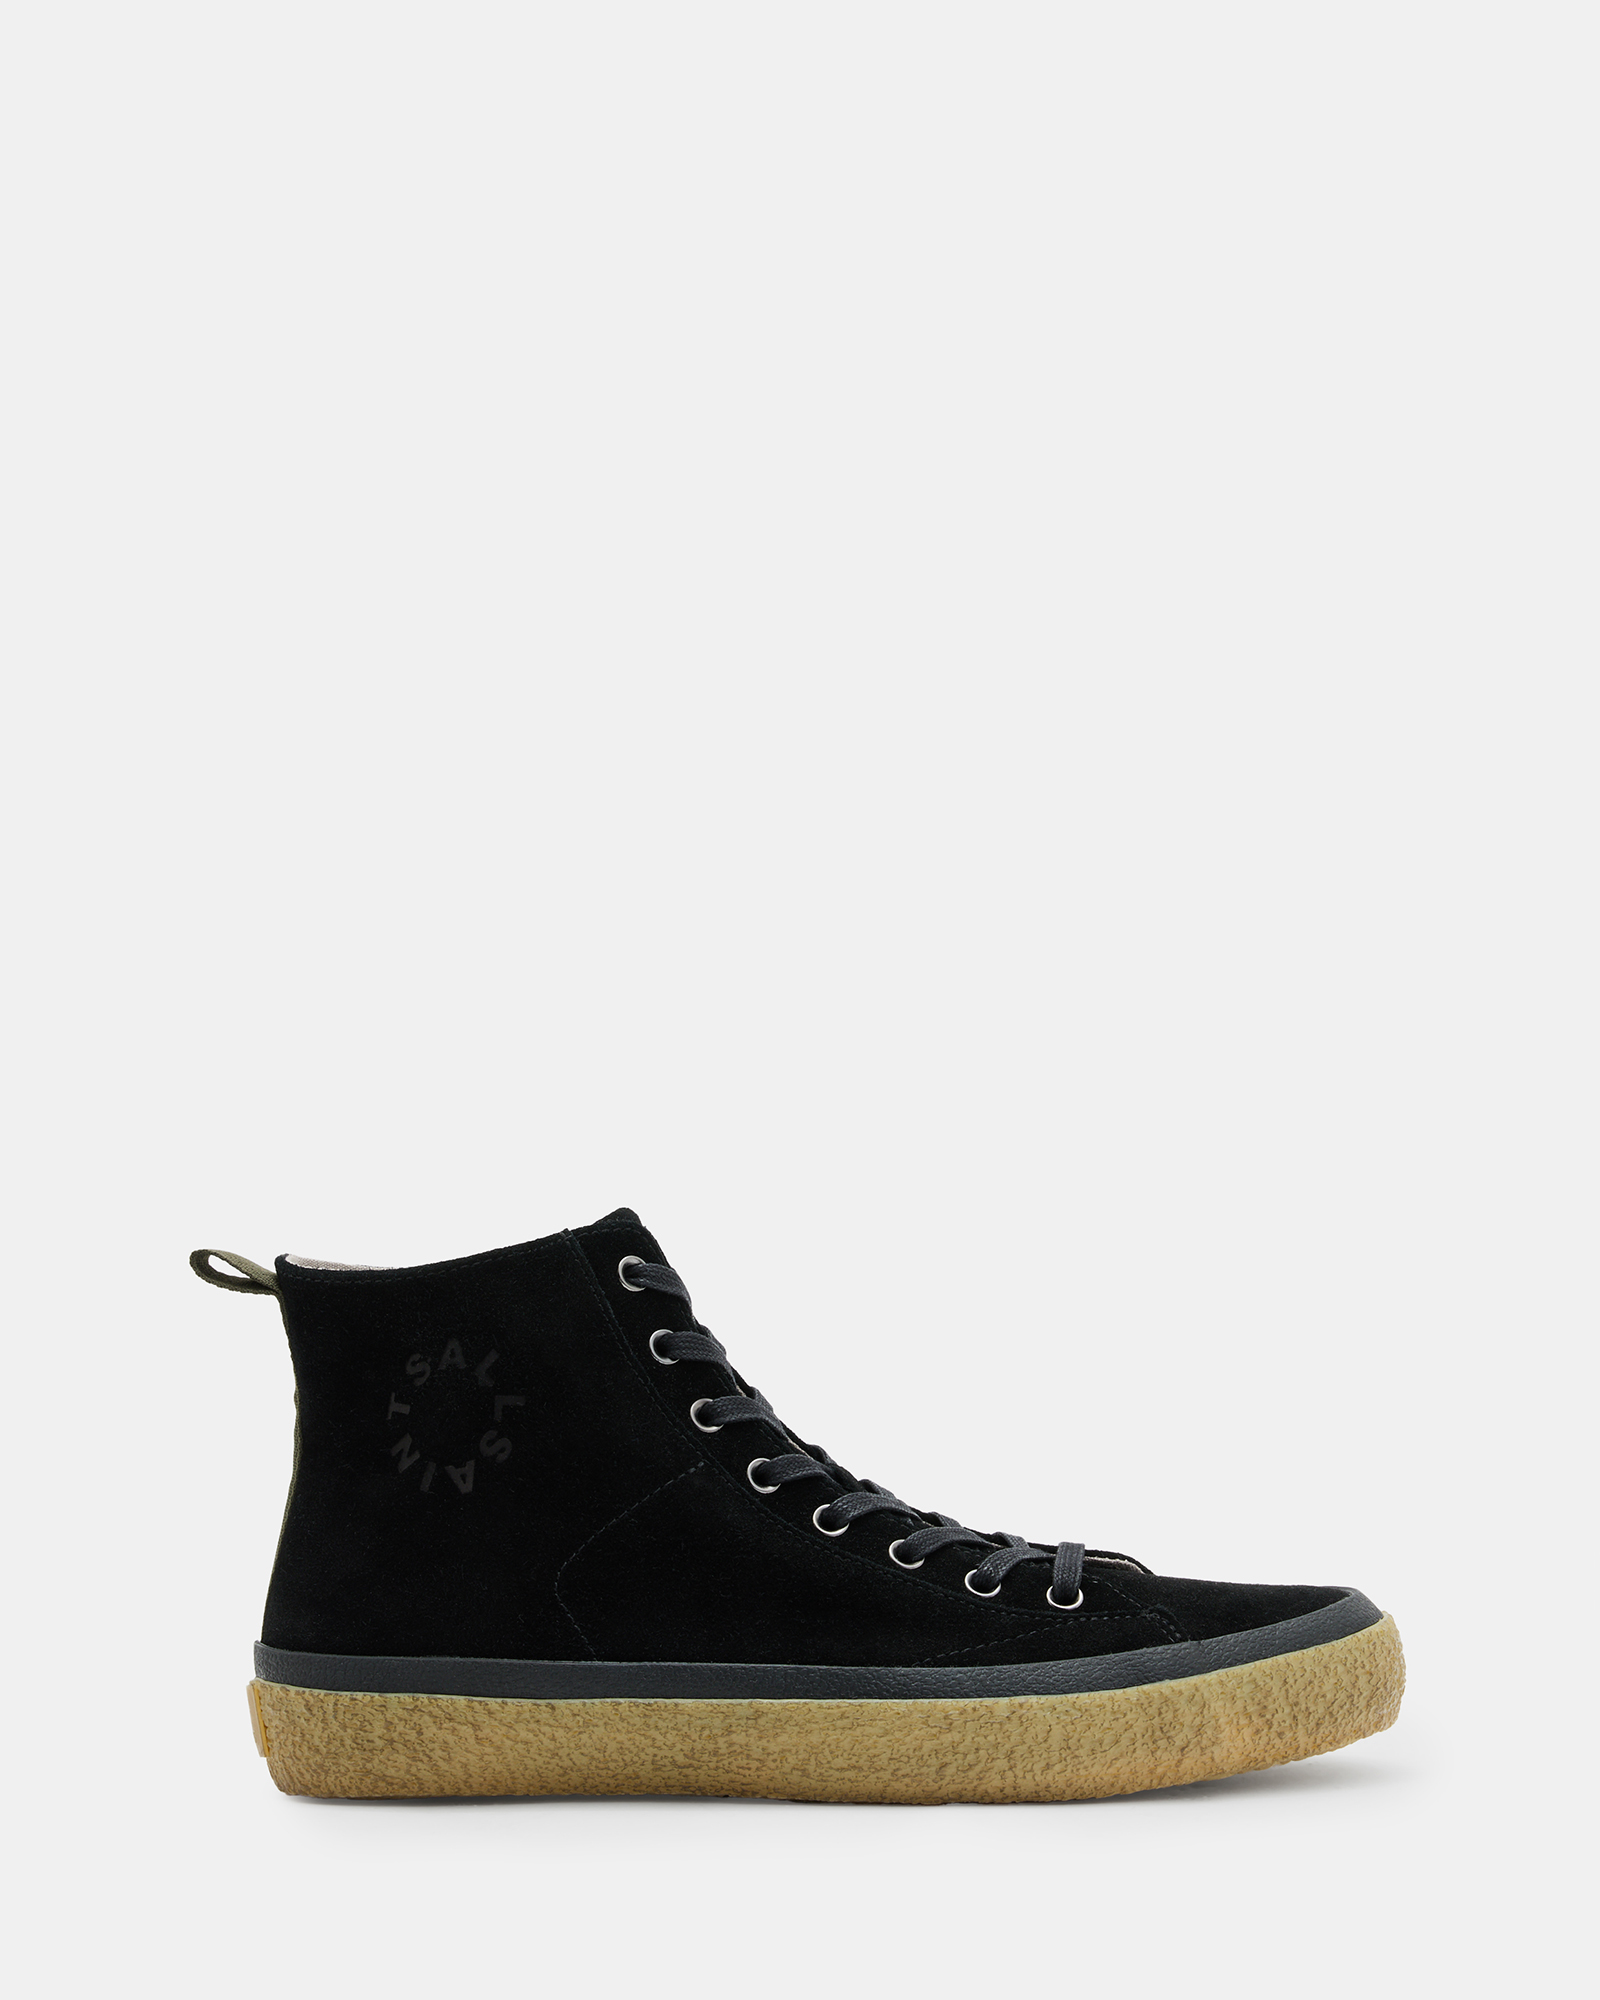 AllSaints Crister Logo Leather High Top Trainers,, Black